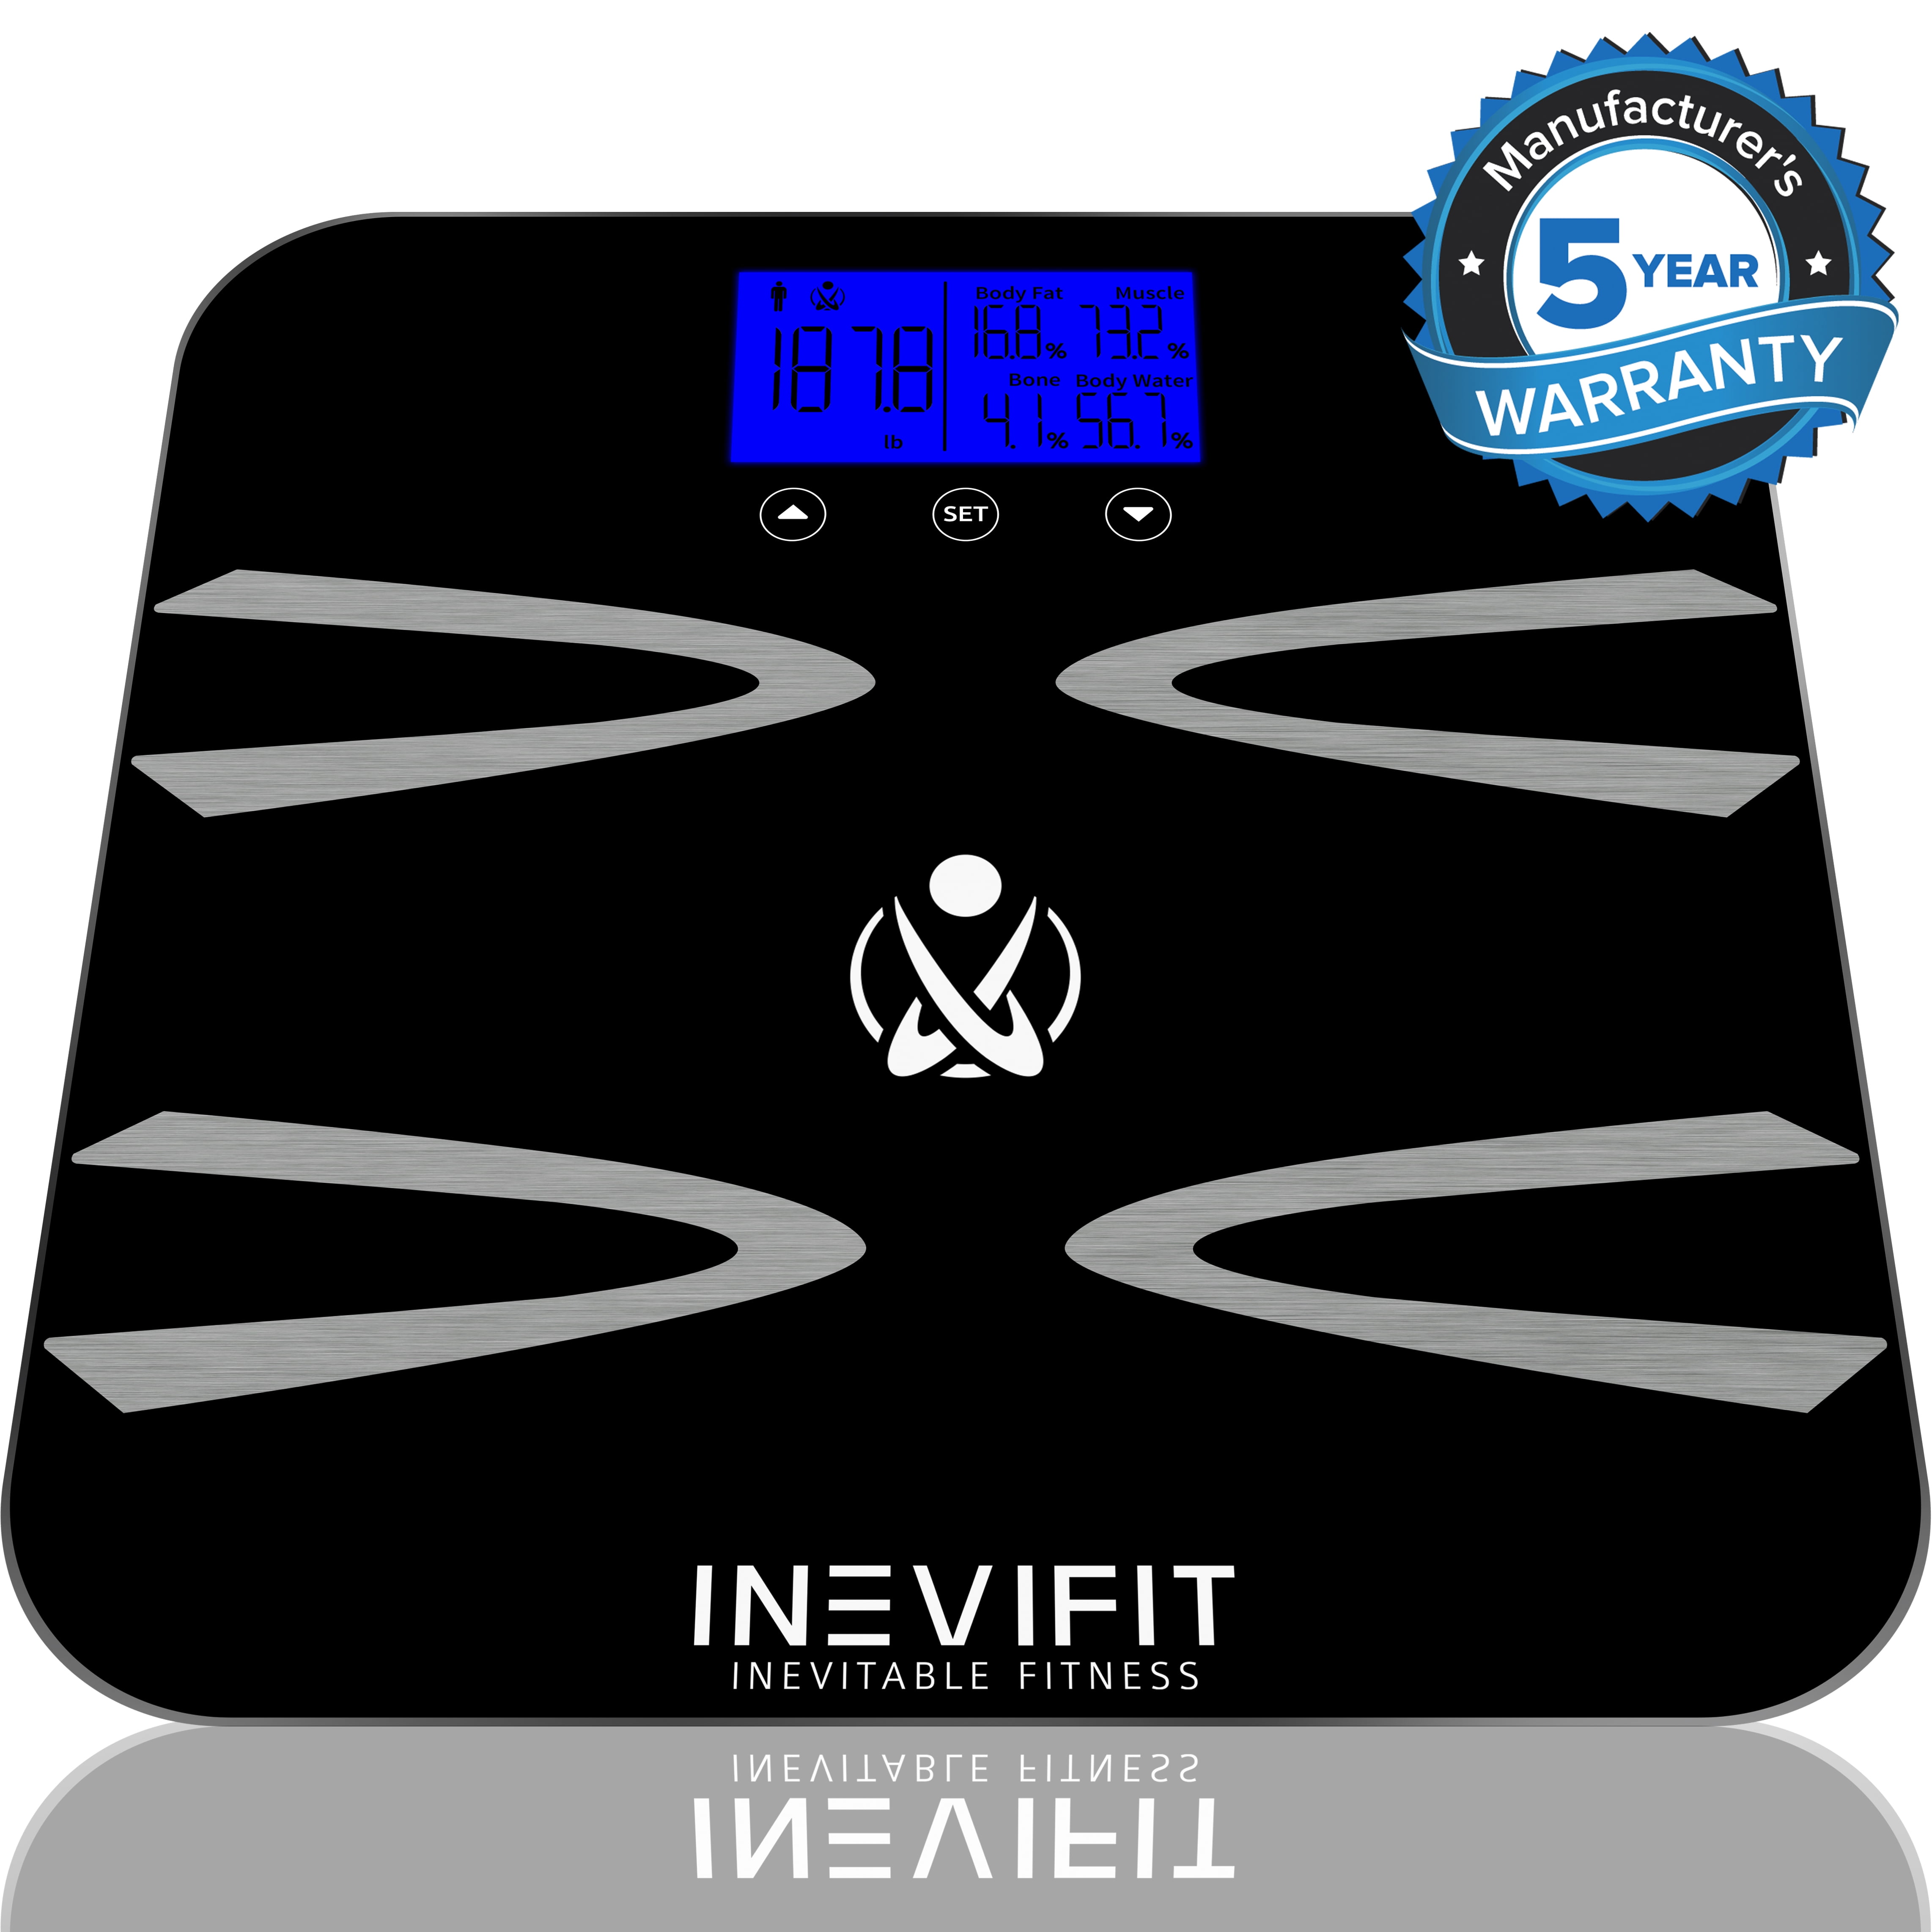 INEVIFIT BODY-ANALYZER SCALE, Highly Accurate Digital Bathroom Body  Composition Analyzer, Measures Weight, Body Fat, Water, Muscle, BMI,  Visceral Fat